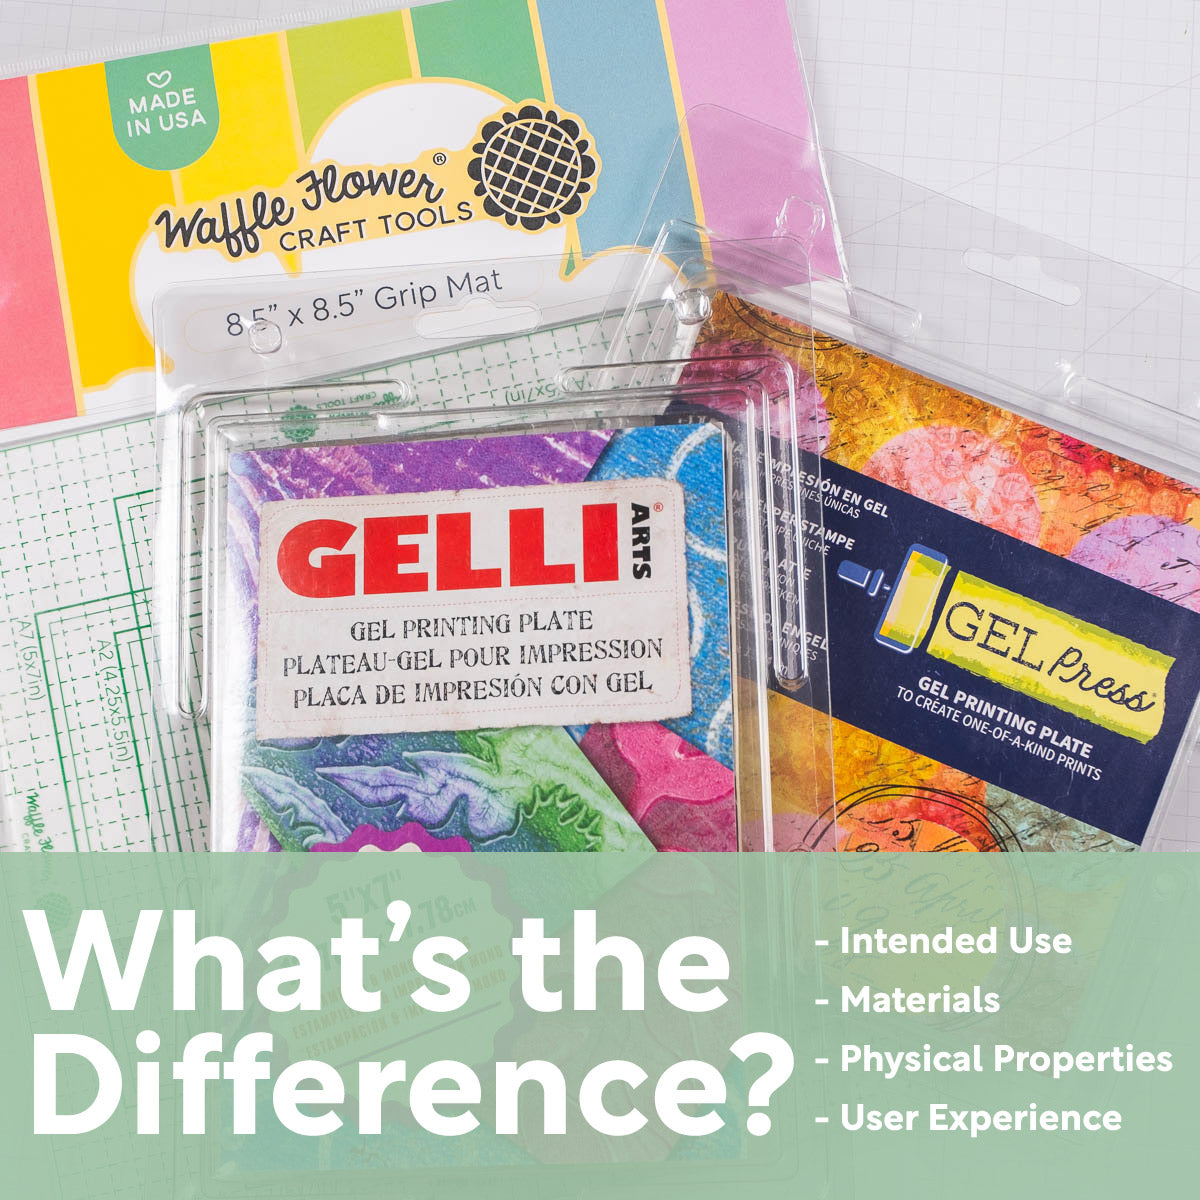 Gelli Gel Printing Plate 6x6 - Wet Paint Artists' Materials and